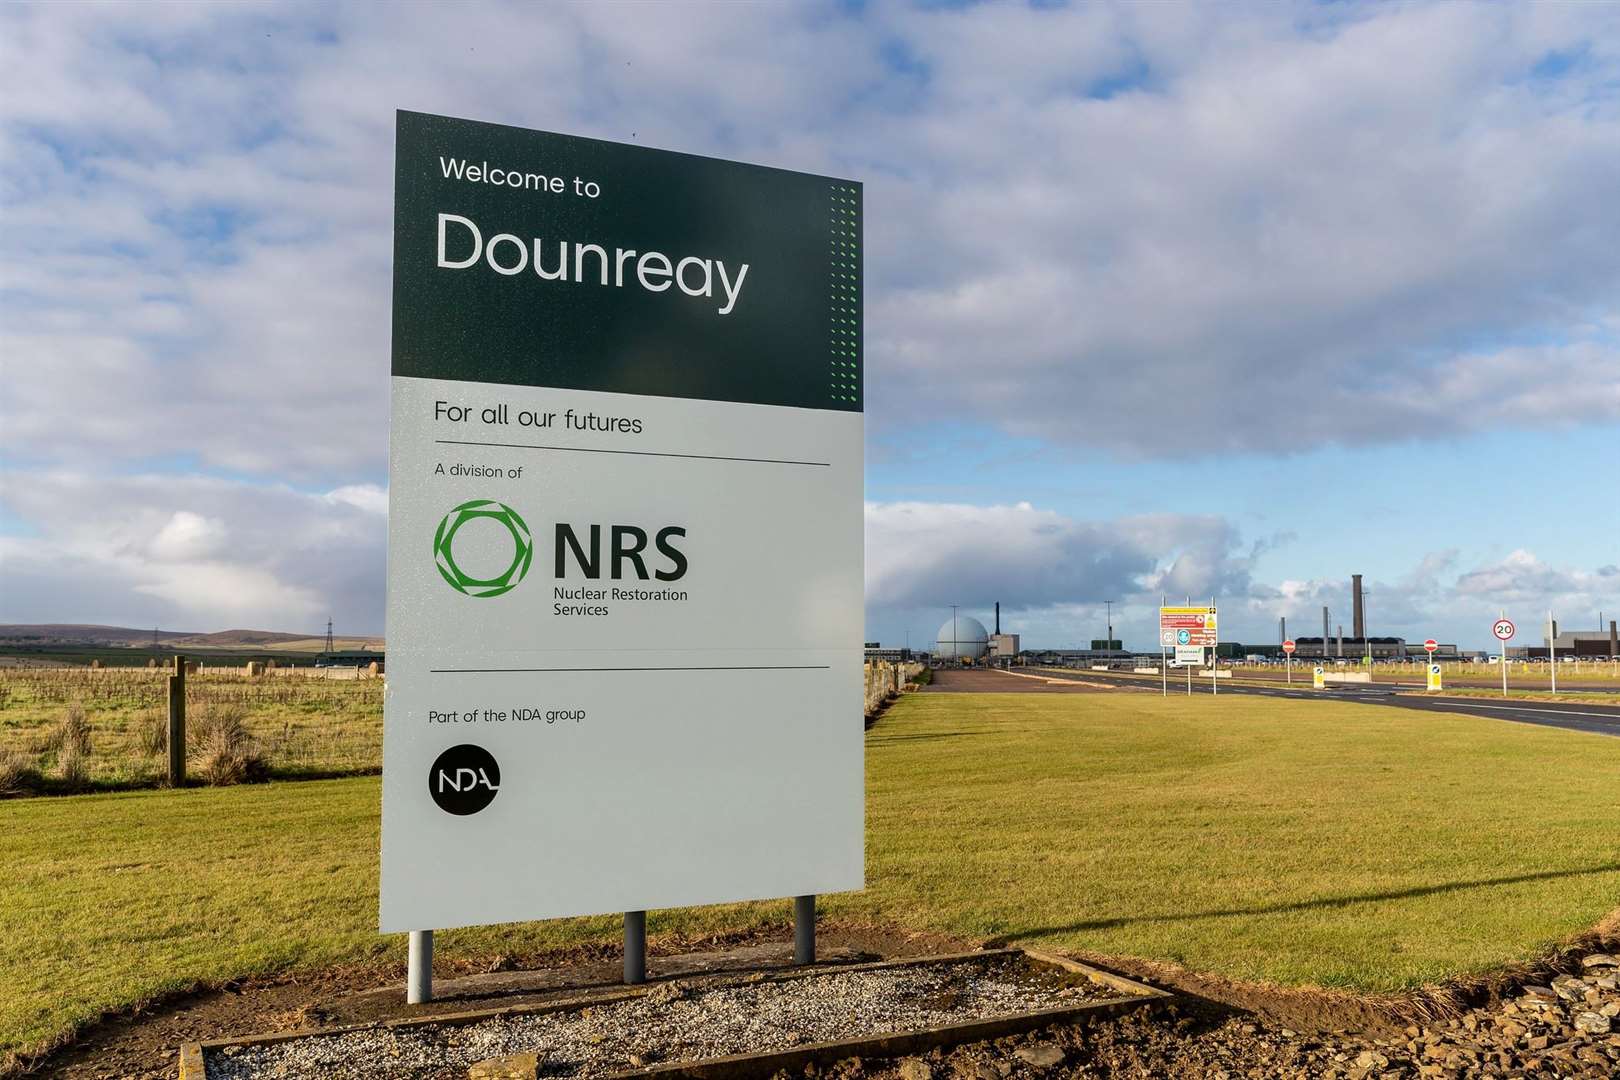 Decommissioning of the Dounreay site is now expected tp take until the 2070s.